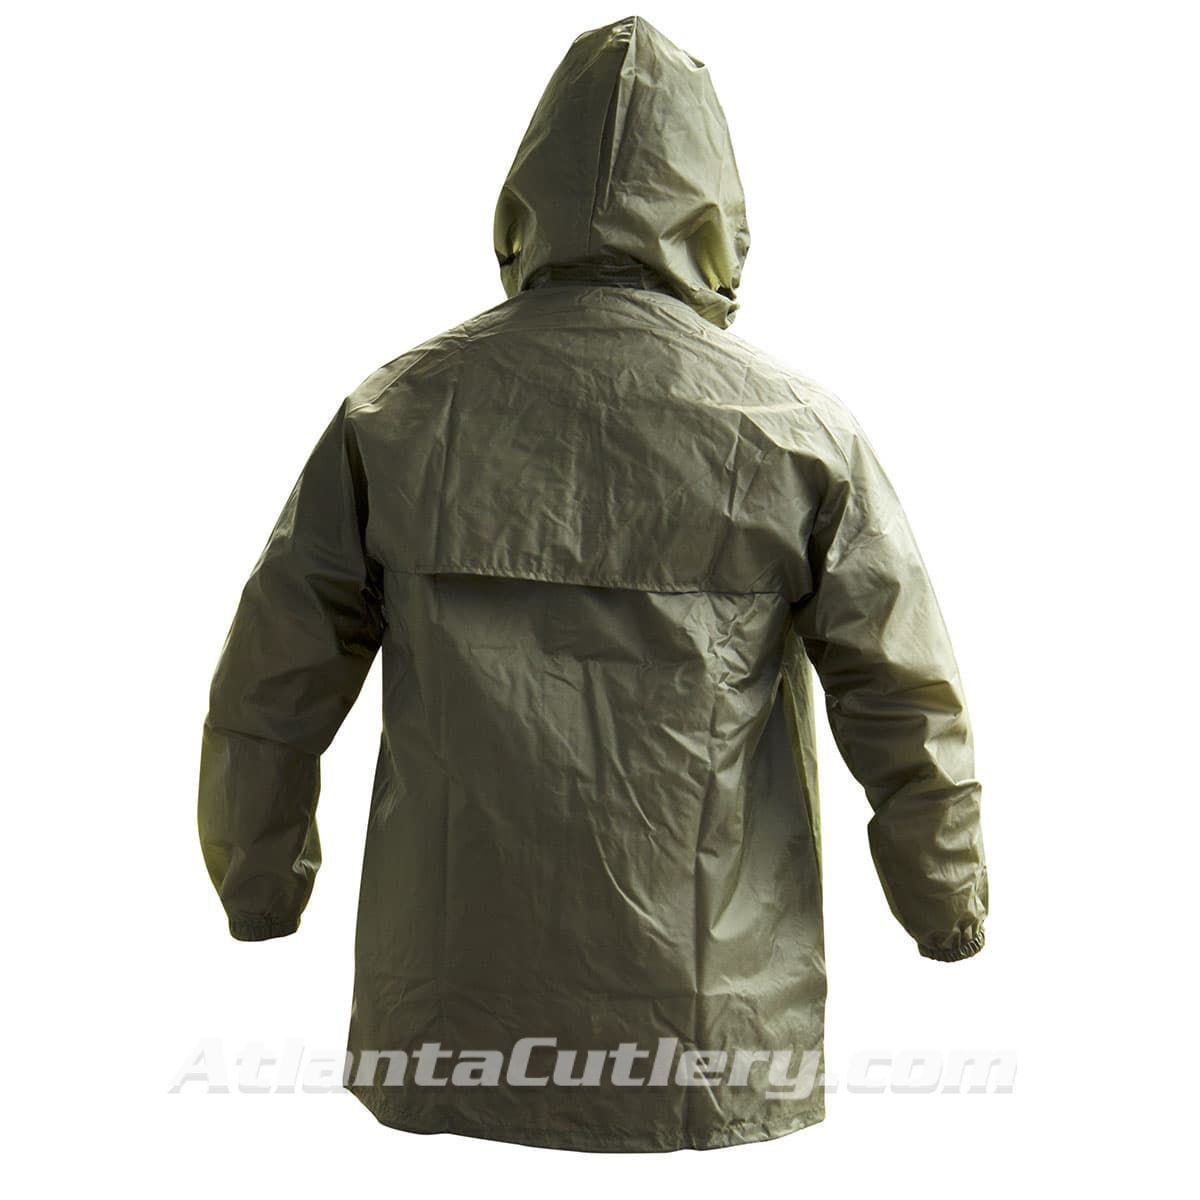 Military Surplus French Wet Weather Jacket With Hood - Atlanta Cutlery